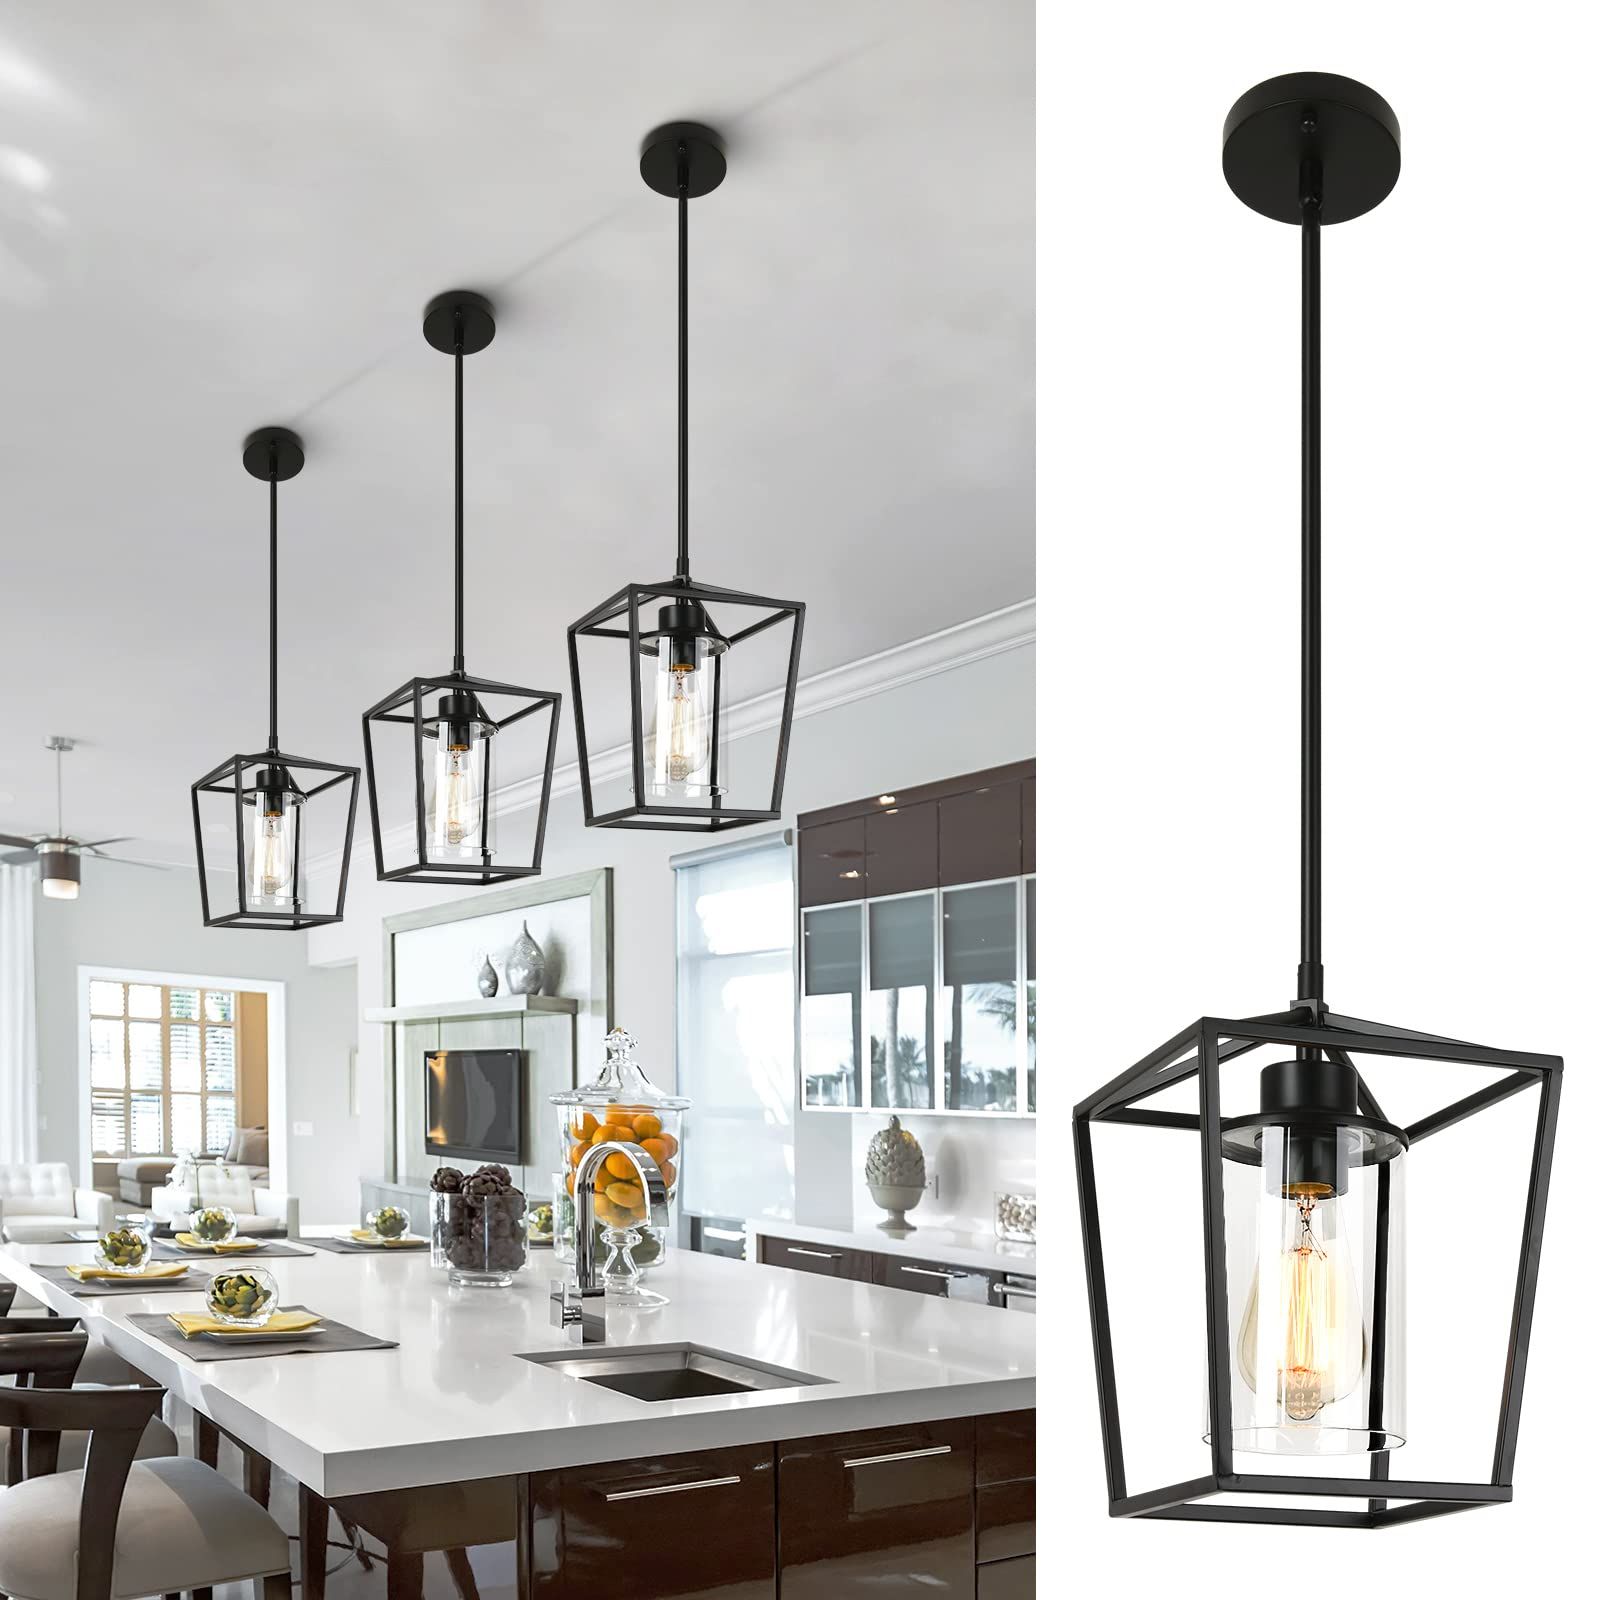 Best And Newest 1 Light Black Pendant Light Fixture Farmhouse Iron Cage Metal Pendant Light  Lantern Hanging Light Fixtures With Clear Glass Shade For Kitchen Island,  Entryway, Dining Room, Hallway – – Amazon Within Clear Glass Lantern Chandeliers (View 8 of 10)